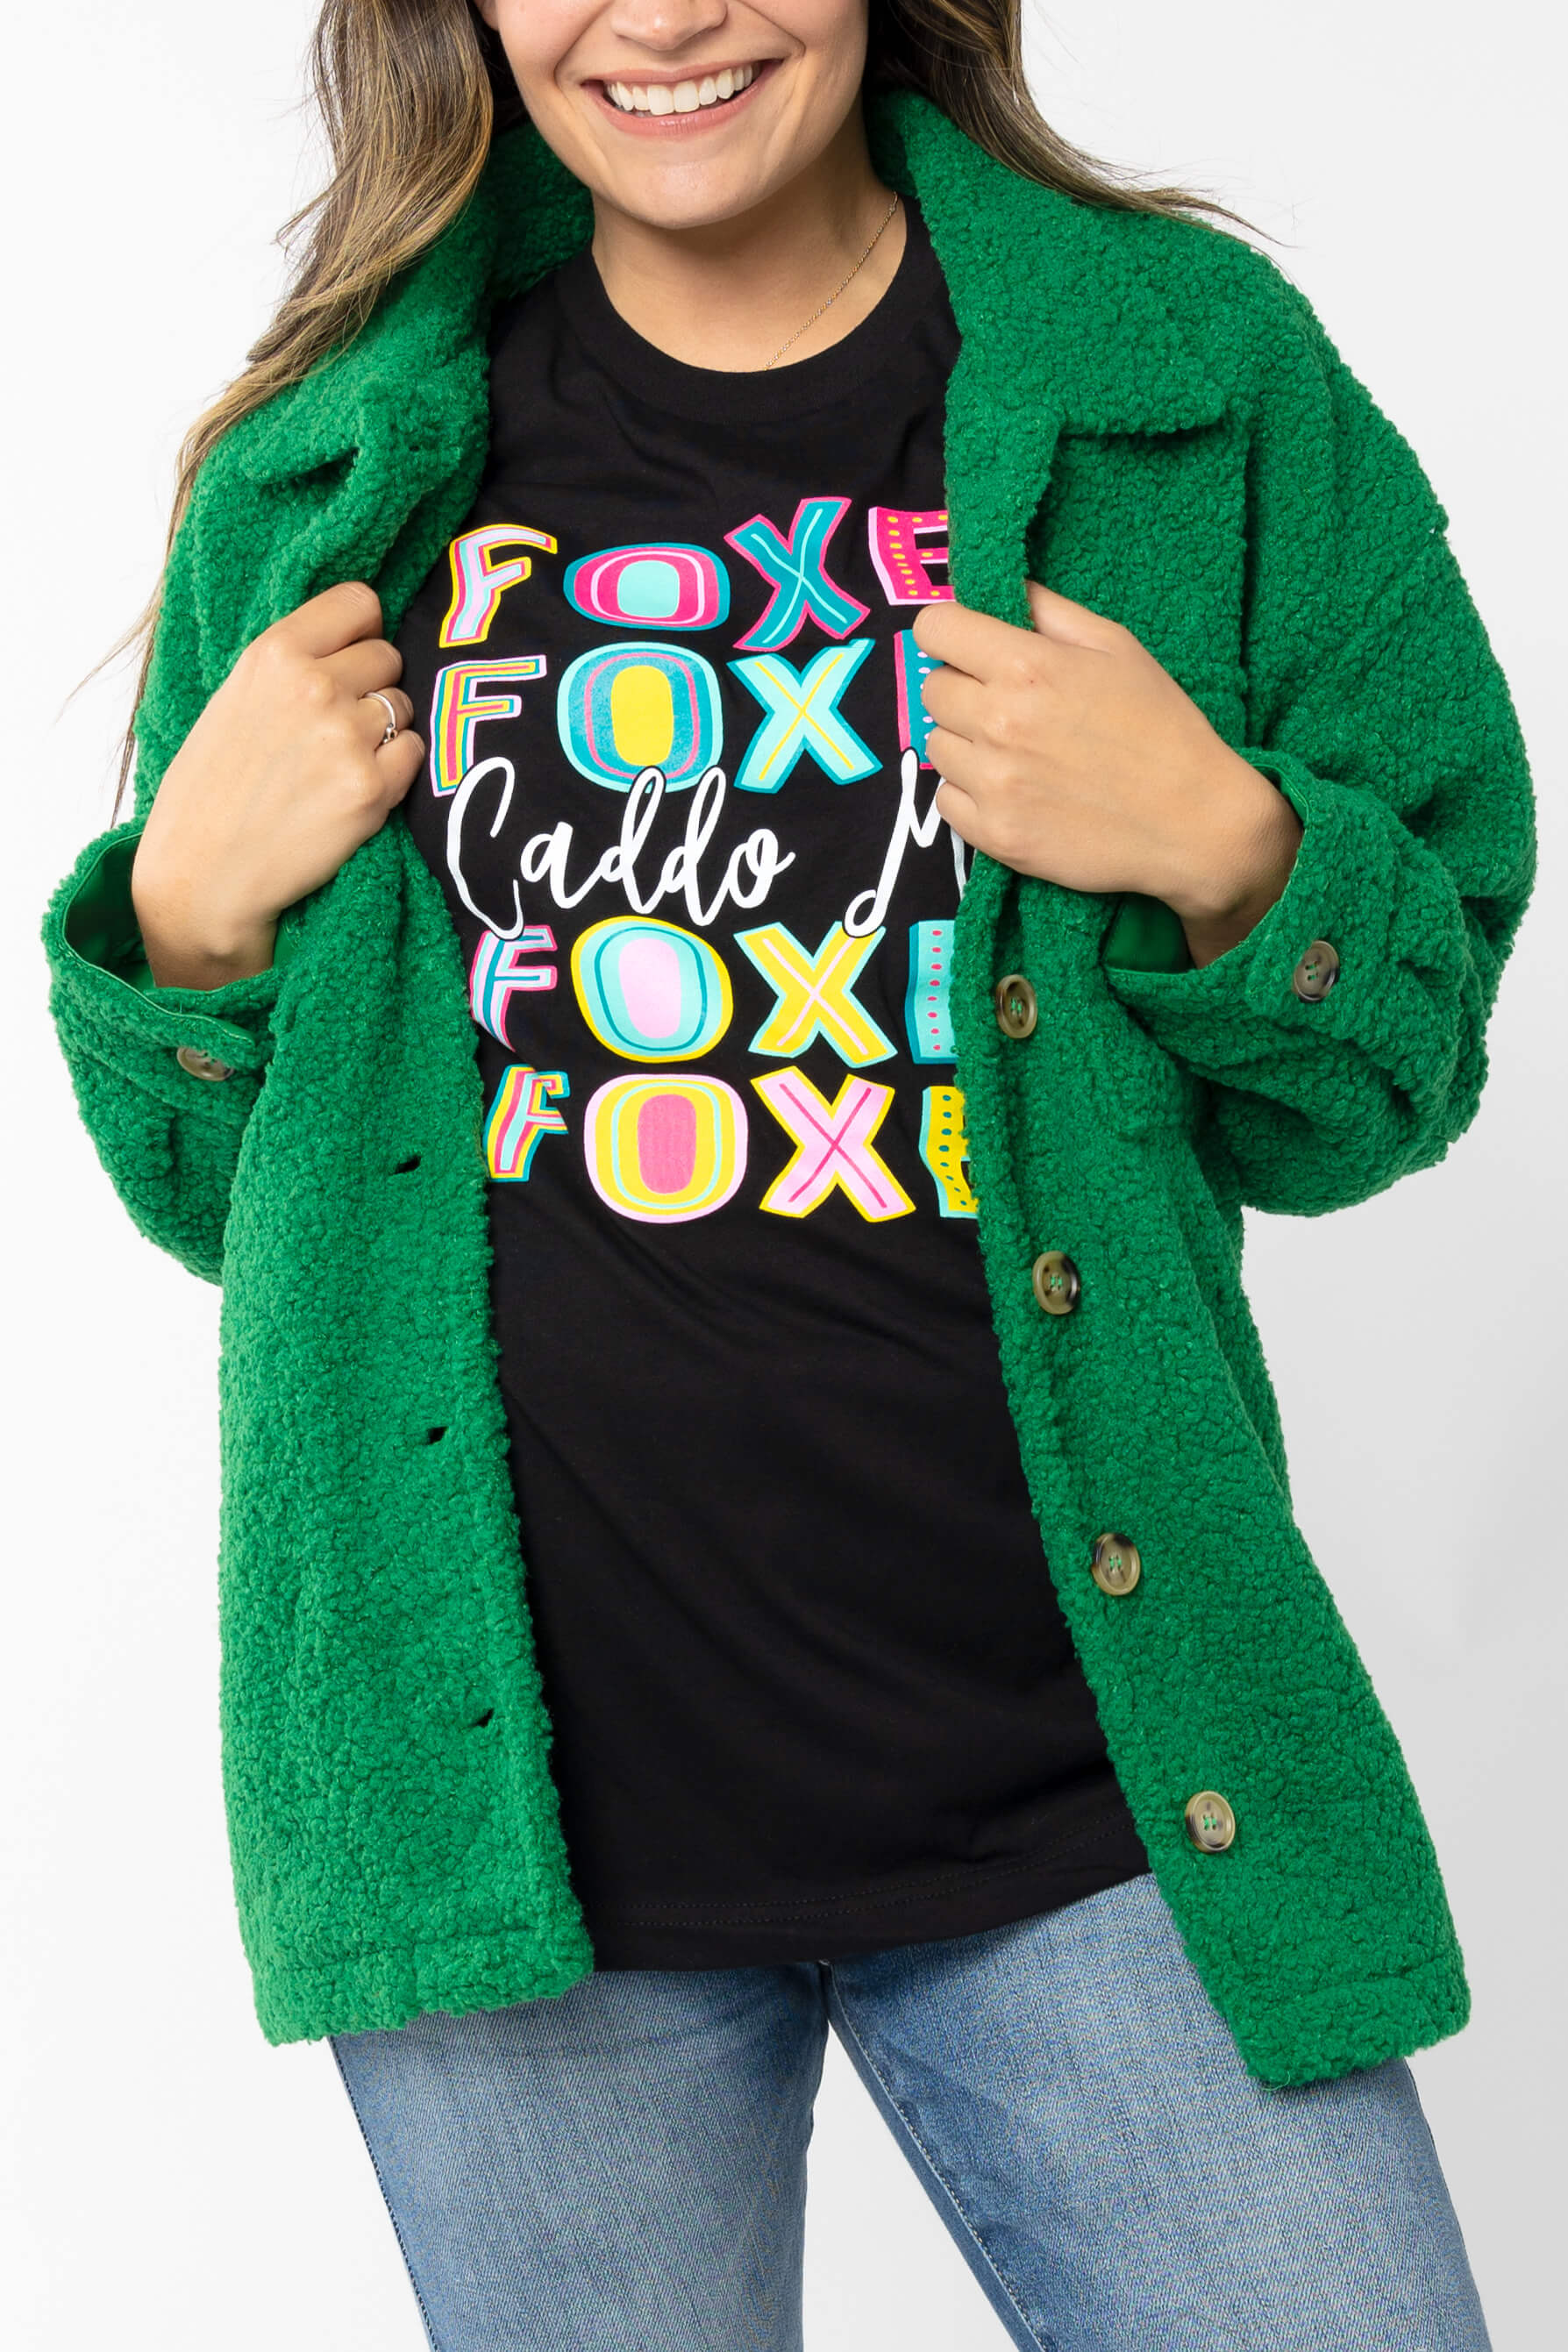 Caddo Mills Foxes Colorful Tee